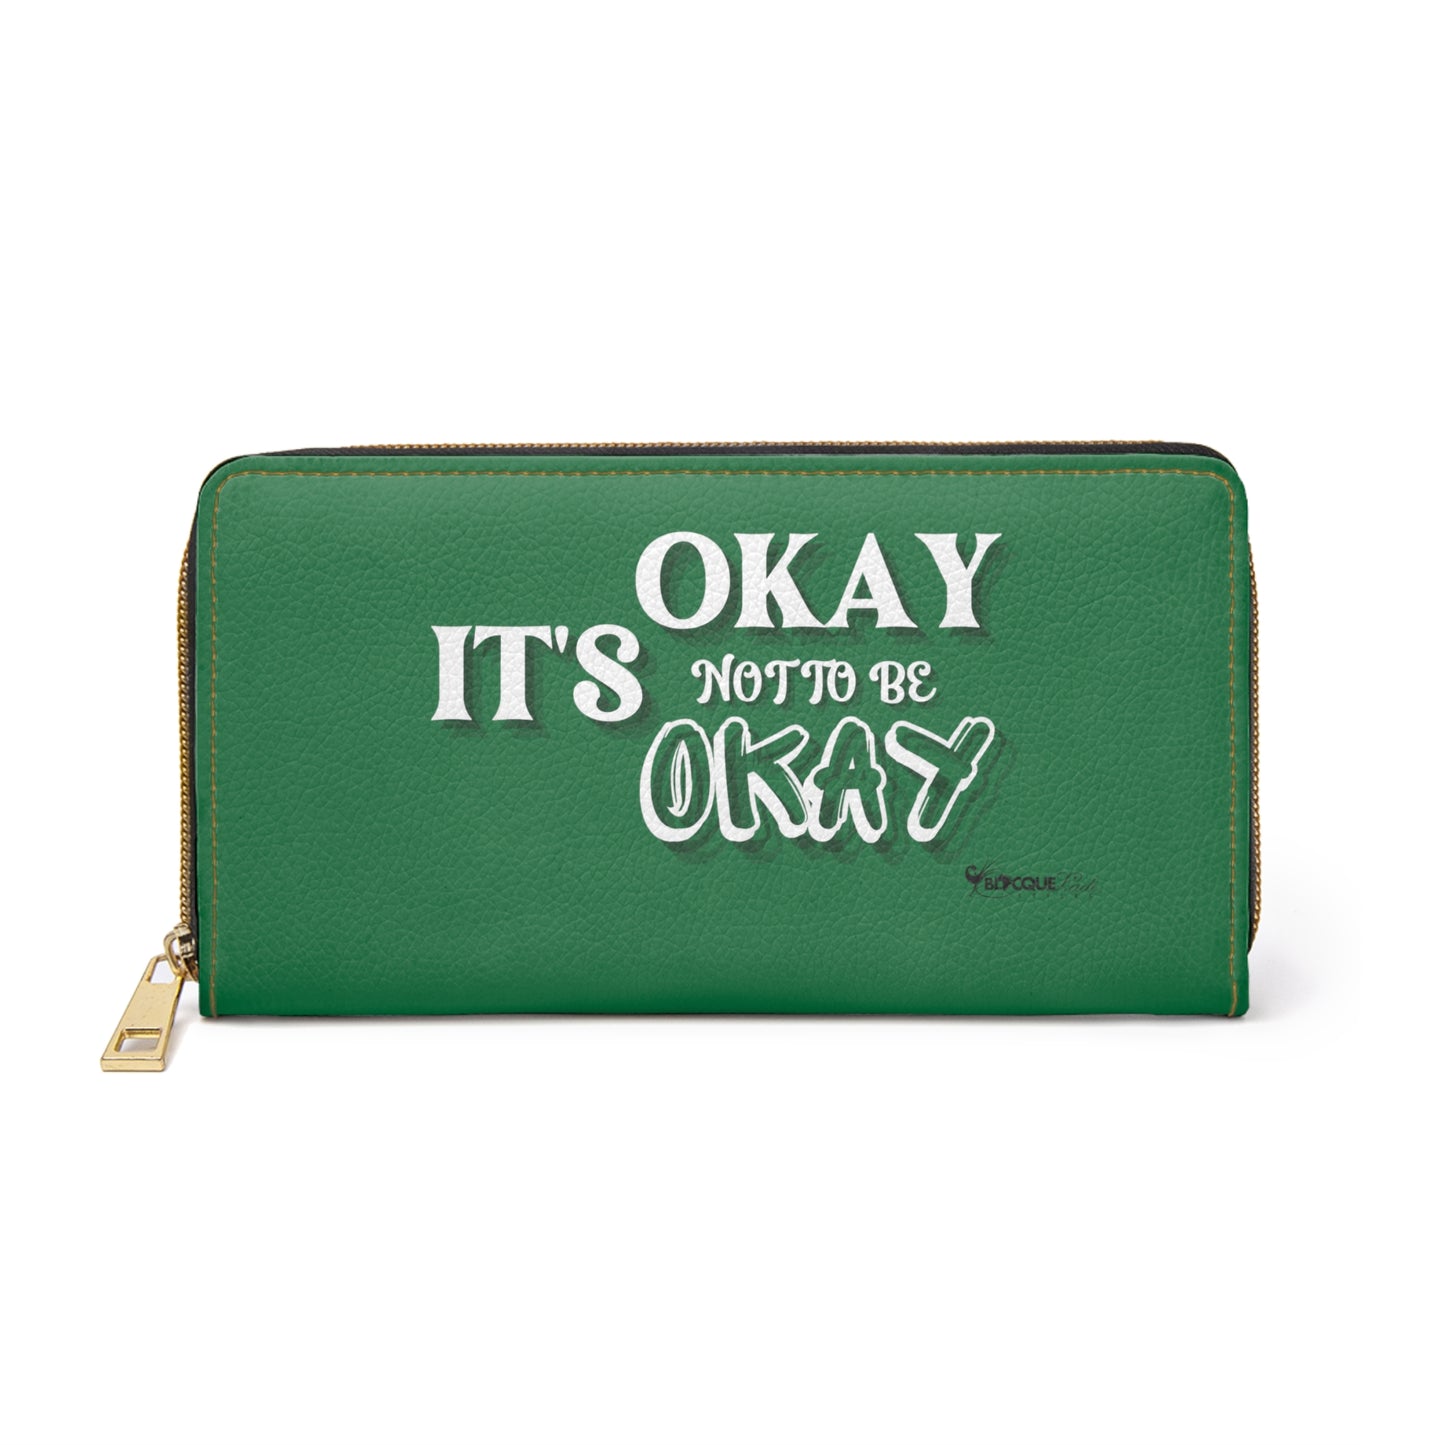 IT’S OKAY, NOT TO BE OKAY- Positive Afrocentric Affirmation Vegan Leather Wallet Bag- Empower Your Style and Self-Love; Green Wallet